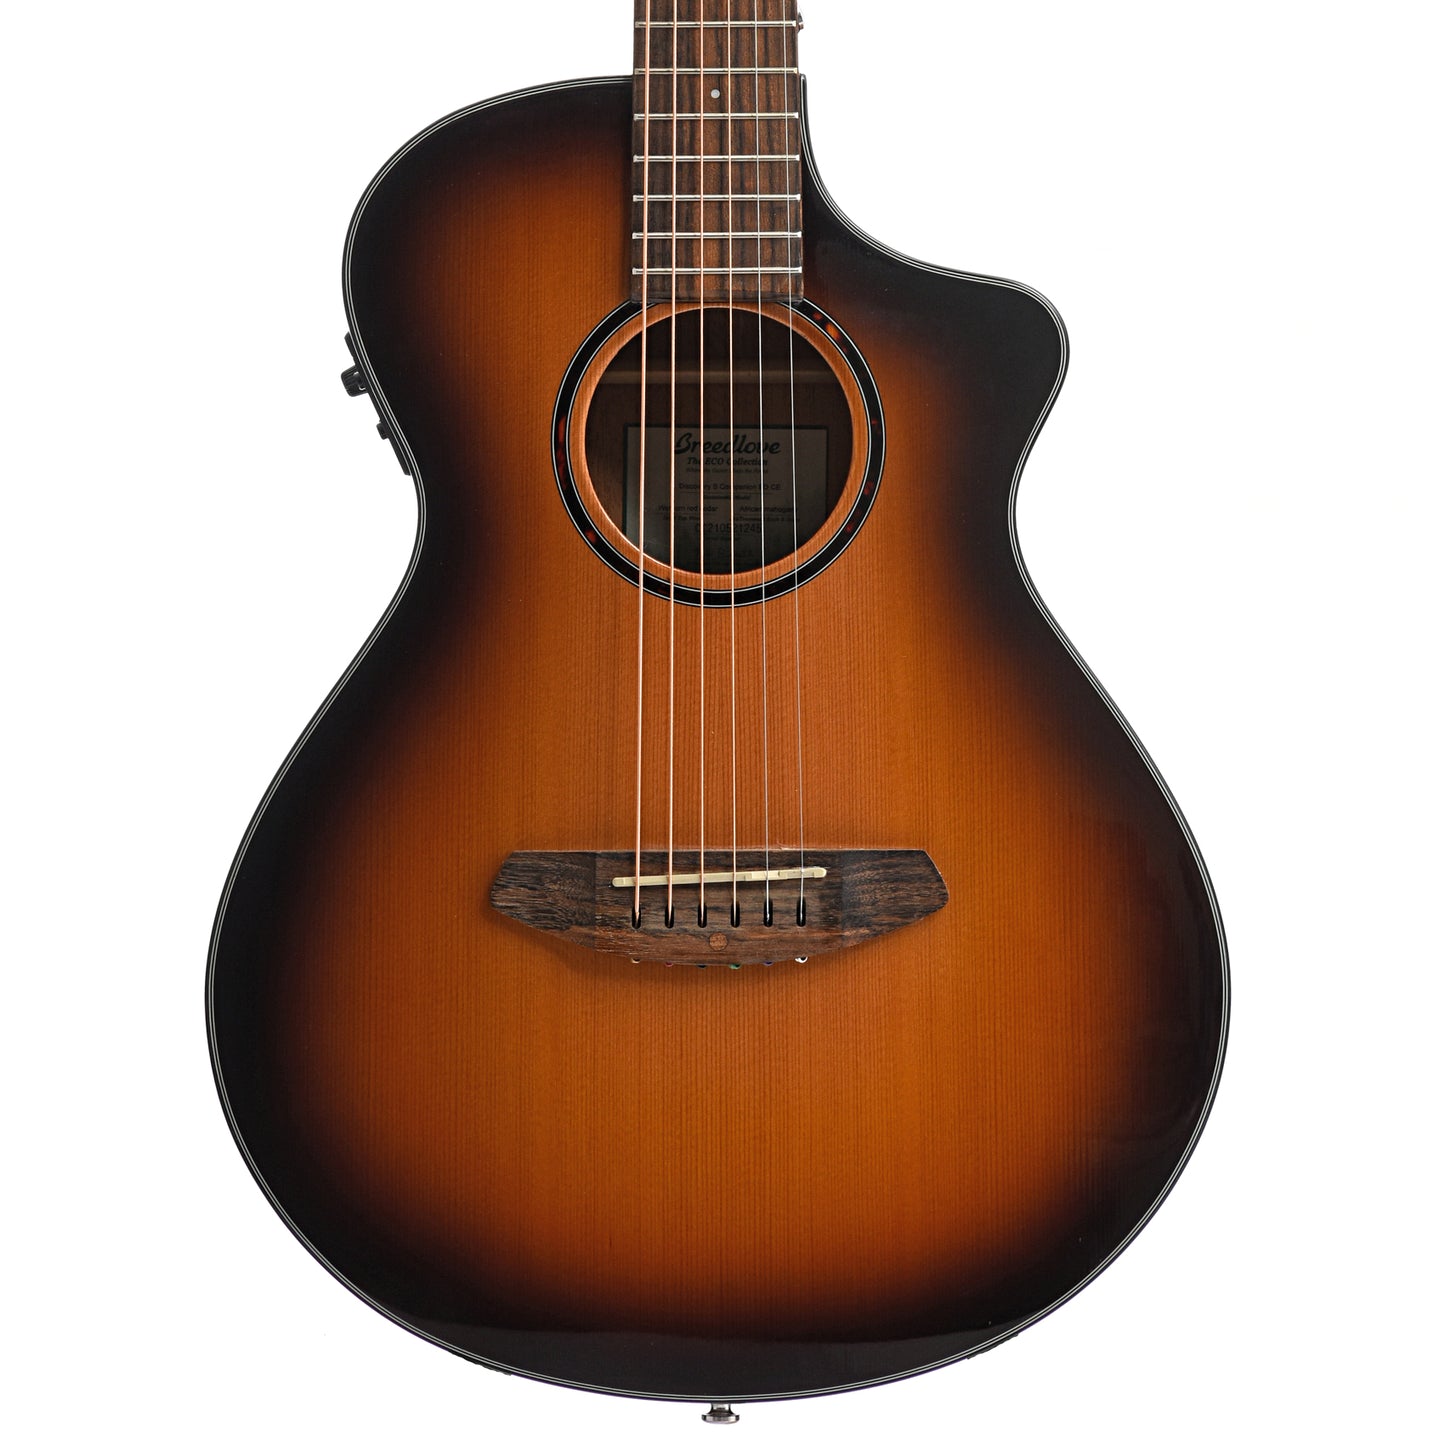 Image 4 of Breedlove Discovery S Companion Edgeburst CE Red Cedar-African Mahogany Acoustic-Electric Guitar - SKU# DSCP44CERCAM : Product Type Flat-top Guitars : Elderly Instruments